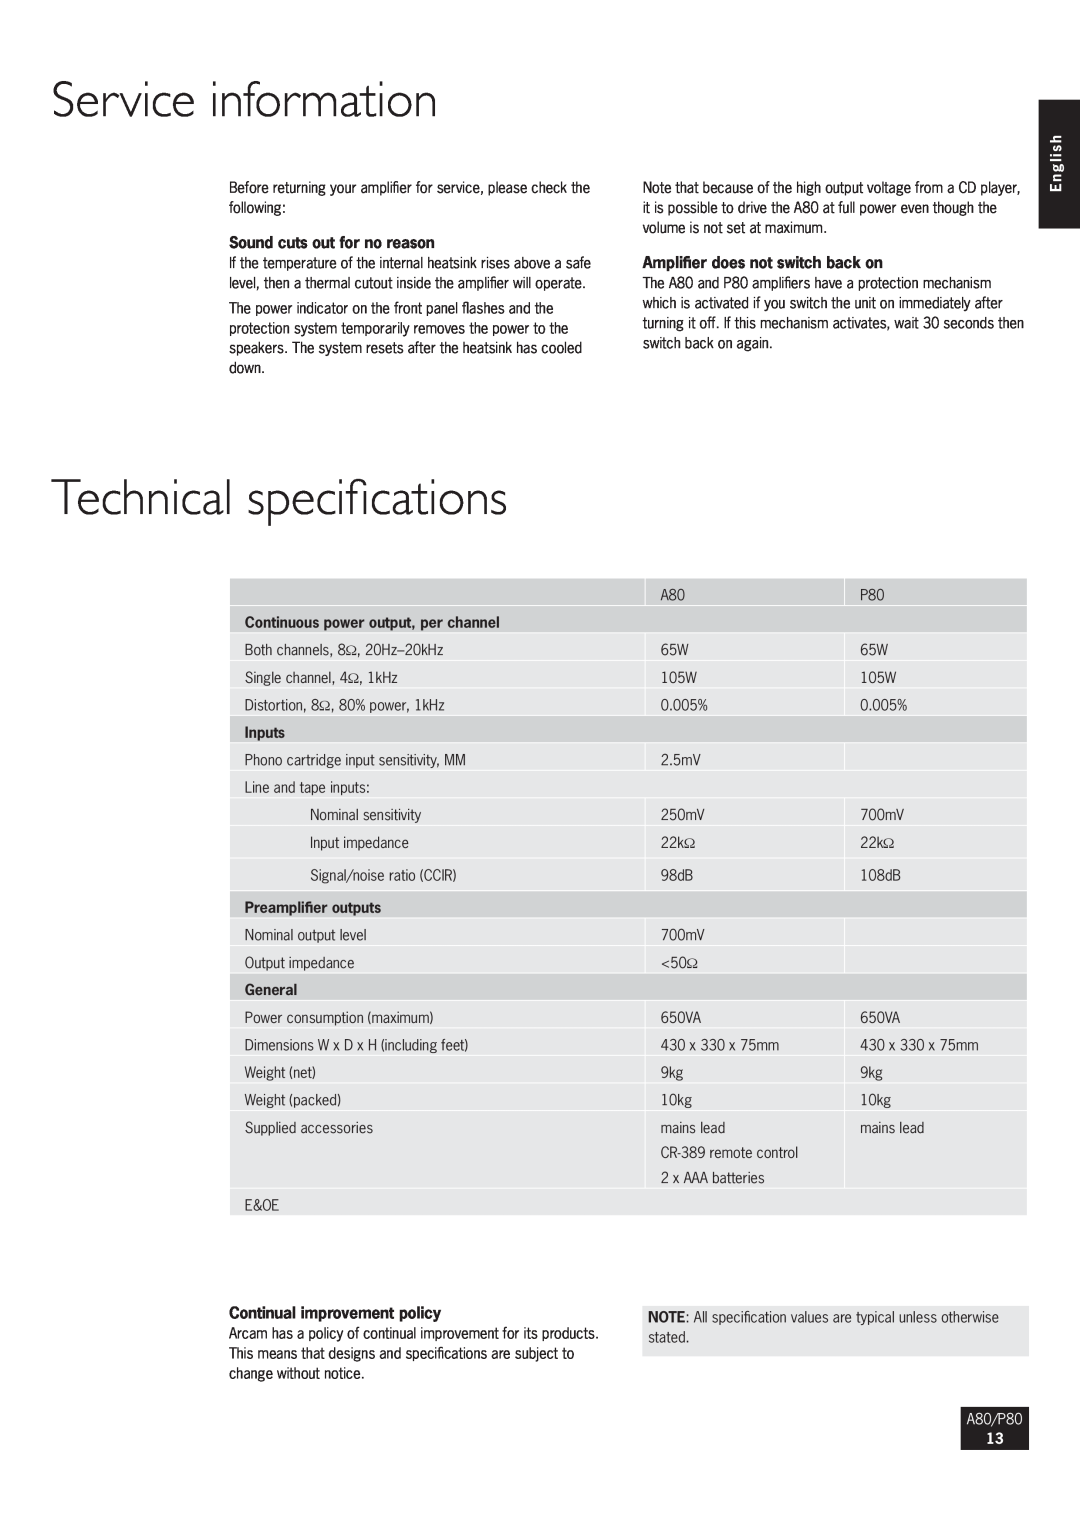 Arcam P80 Service information, Technical specifications, Sound cuts out for no reason, Amplifier does not switch back on 